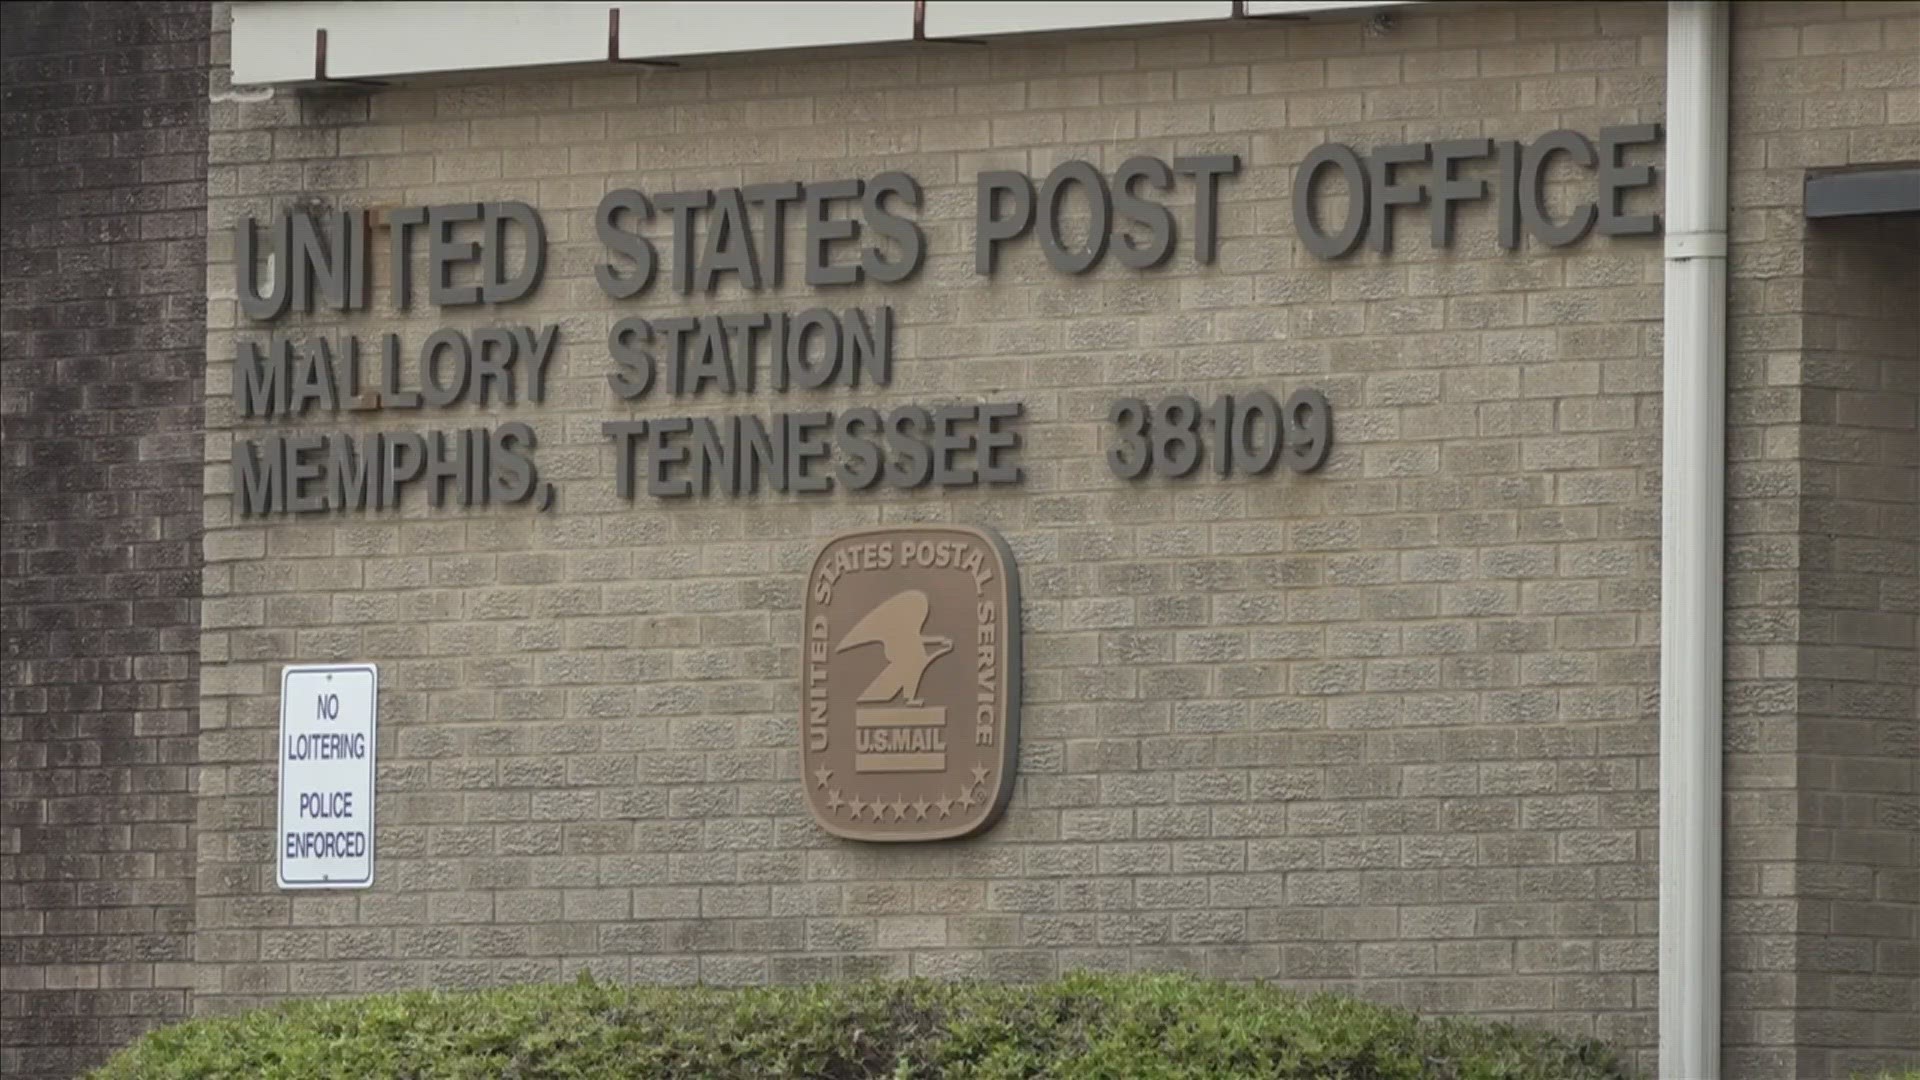 The events will be held at different post office centers throughout the month of May. Here's where you can find them.